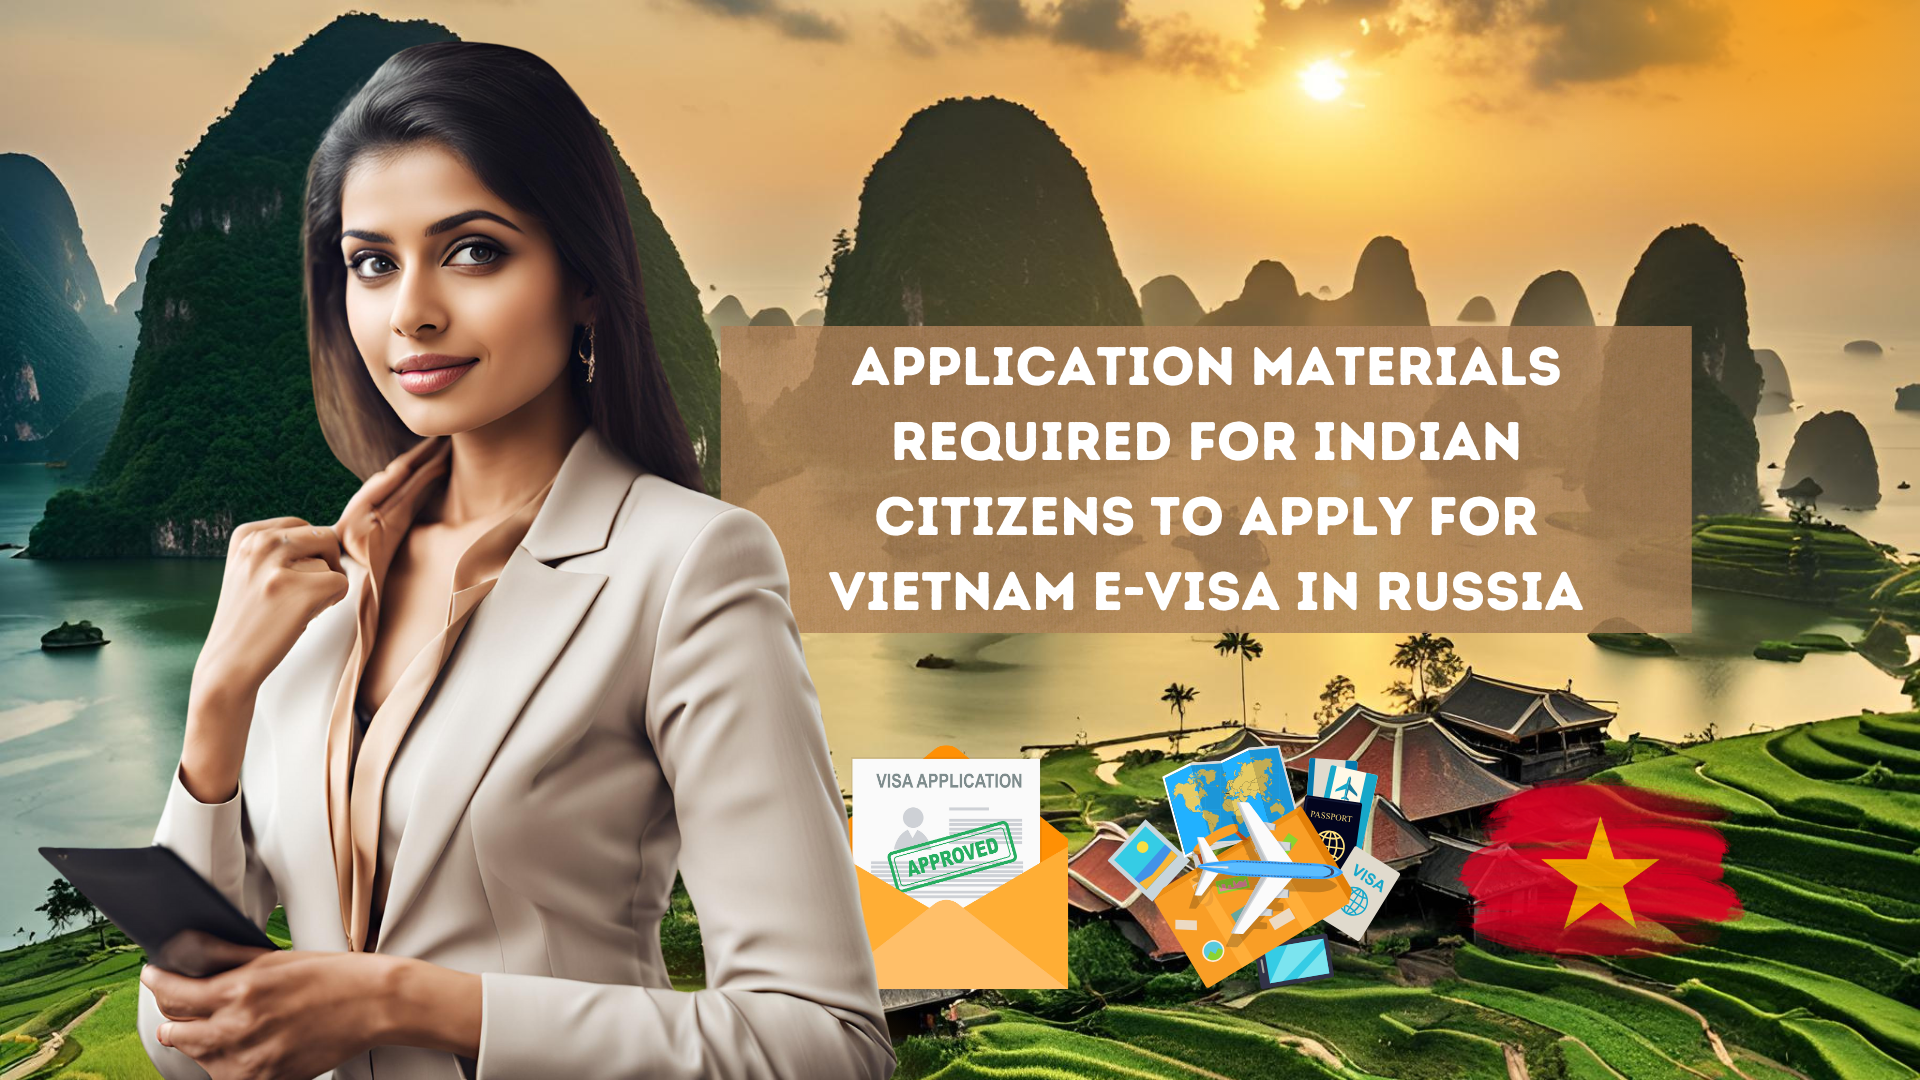 Application materials required for Indian citizens to apply for Vietnam e-visa in Russia